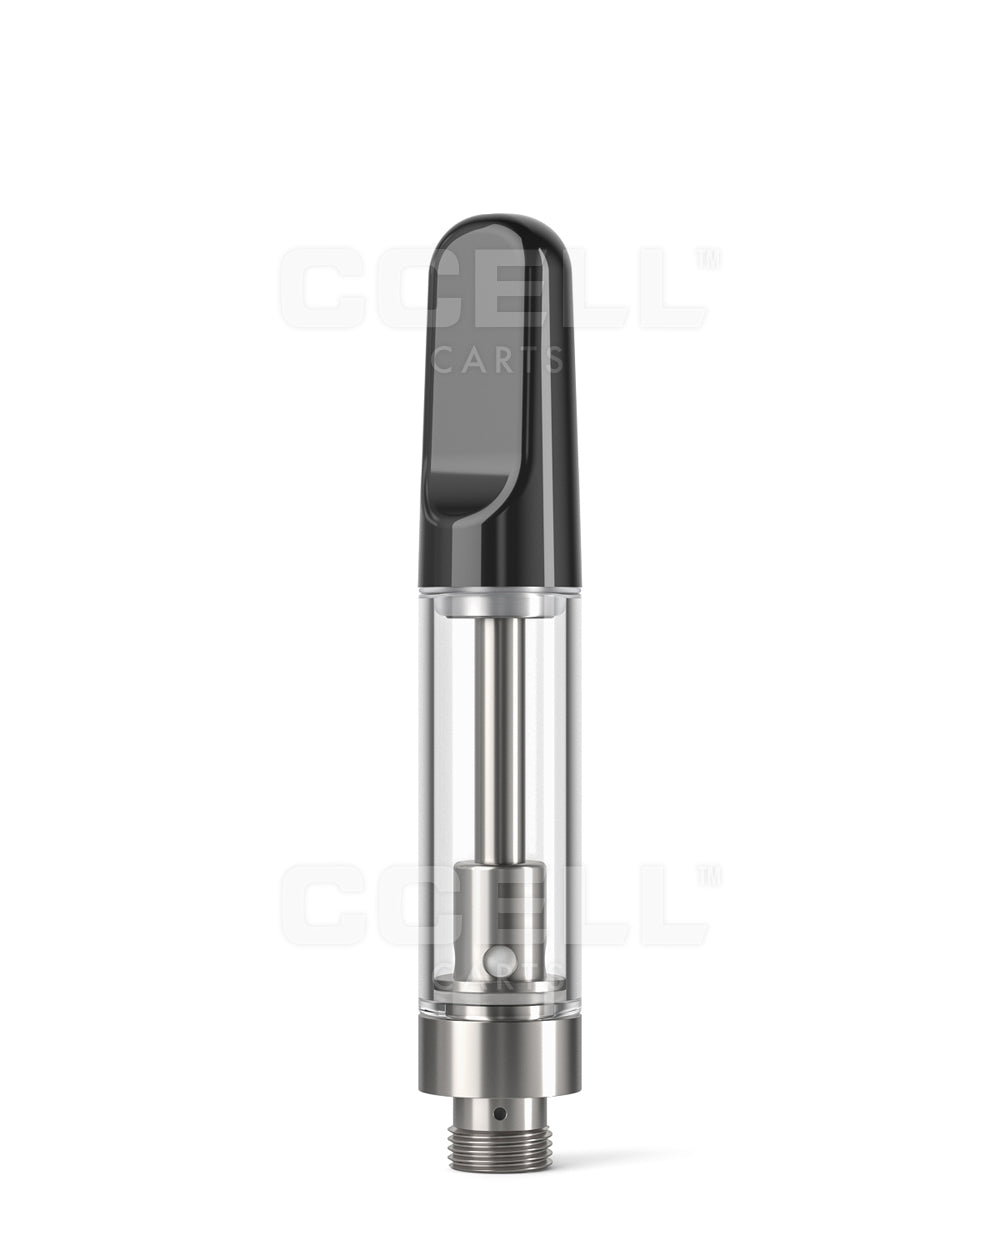 CCELL Glass Cartridge - Ceramic Tapered Mouthpiece 1ml - 100 Count